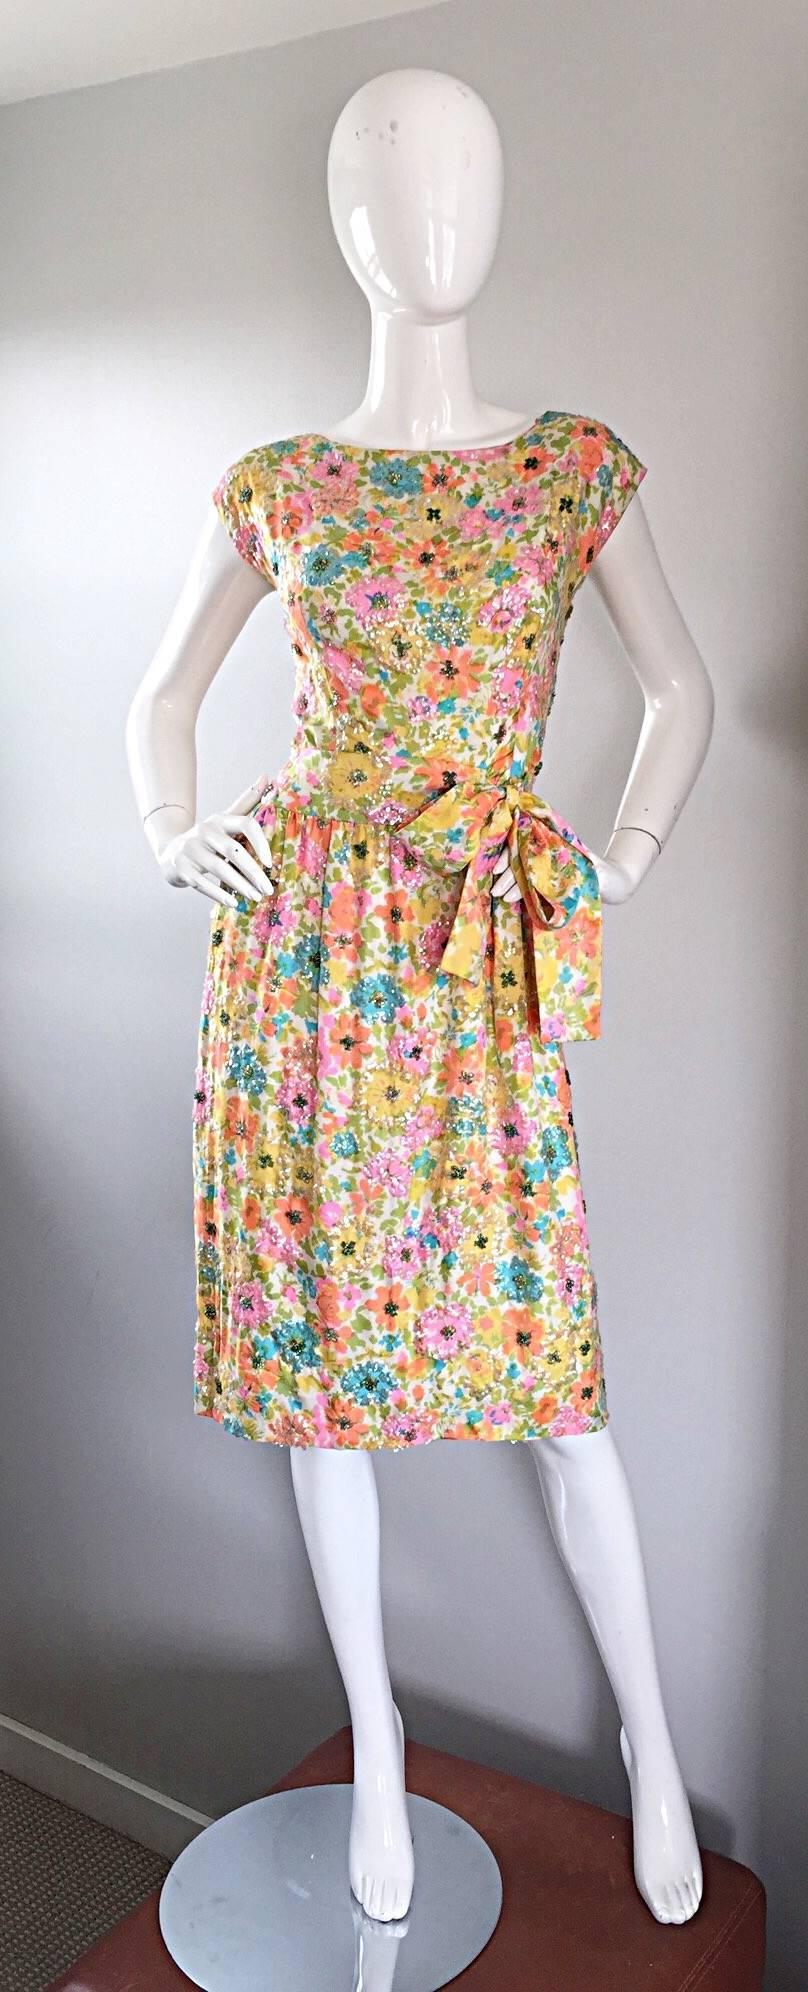 Incredible vintage 50s LARRY ALDRICH silk sequined and beaded dress! Beautiful floral print, with thousands of iridescent sequins and beads hand-sewn throughout. Features an attached bow belt that ties to the left side of the waist, making this